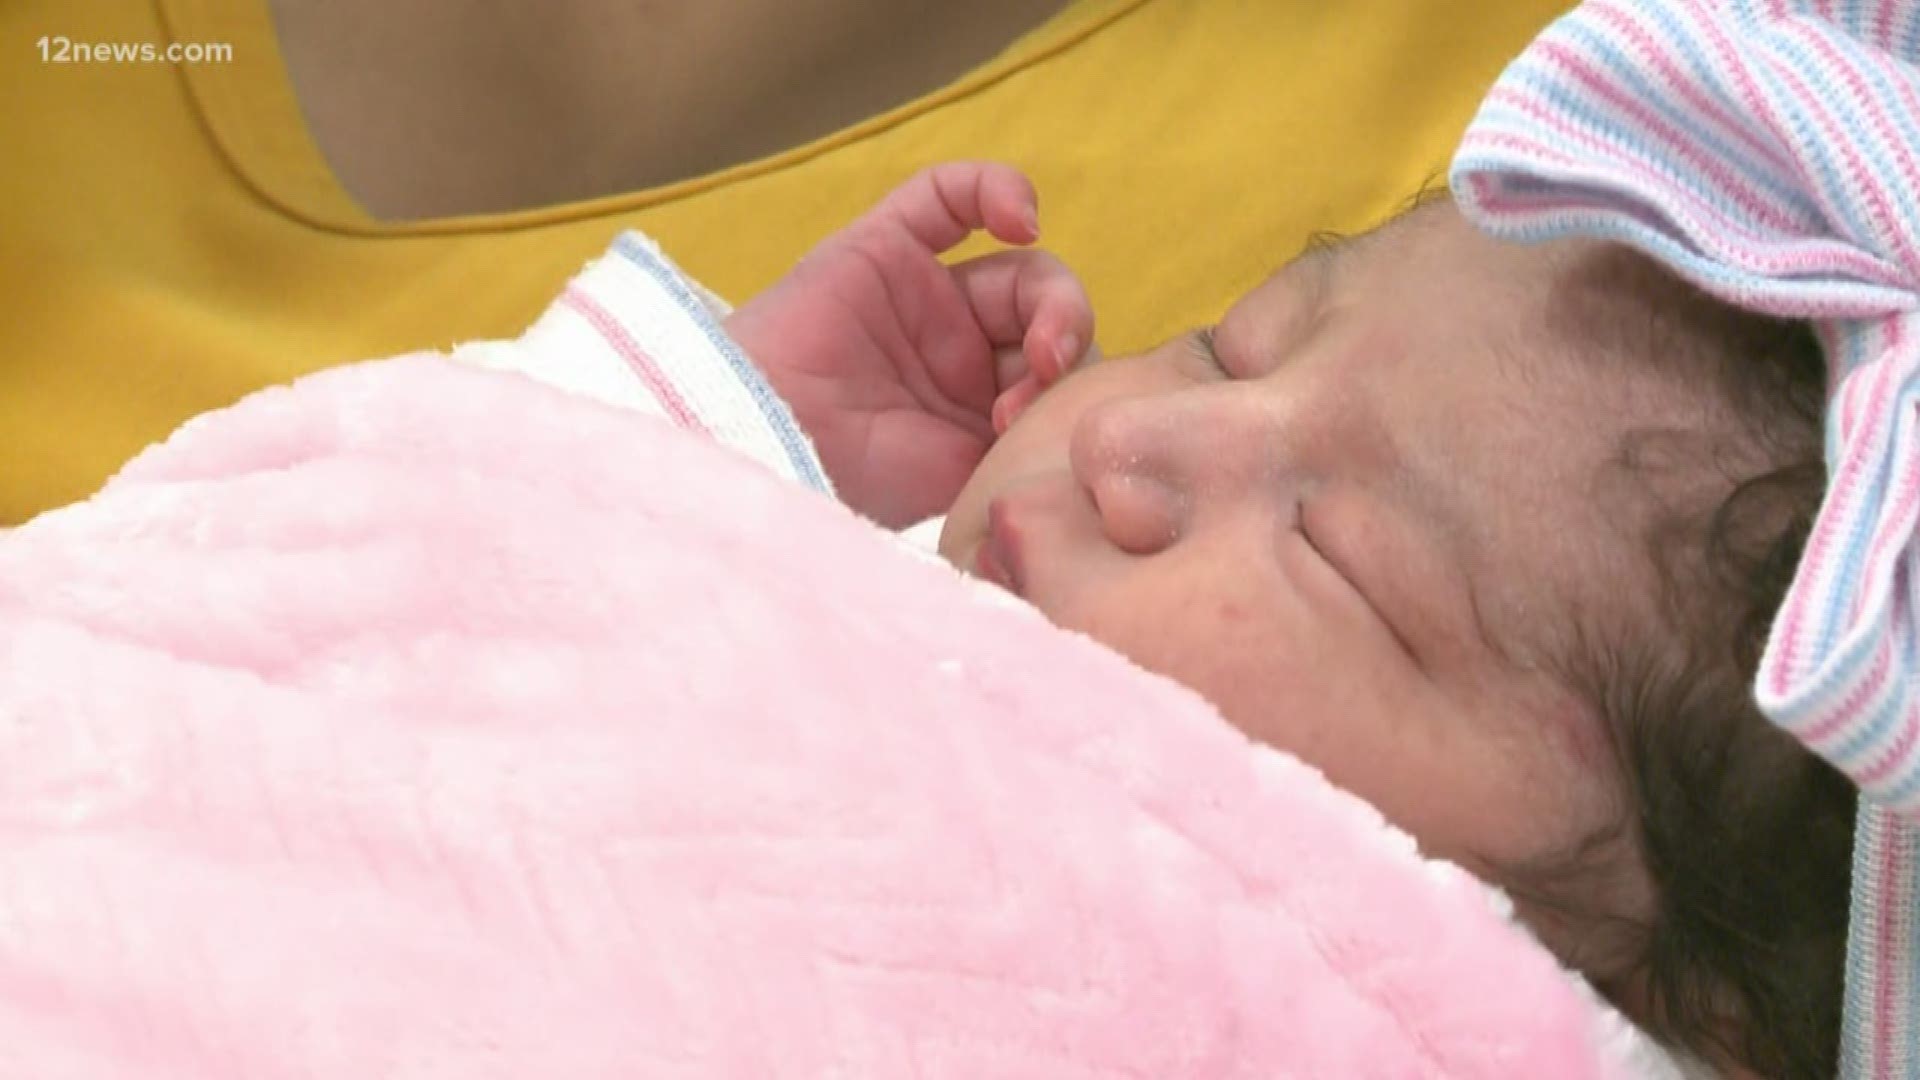 Baby Zoe was born at 12:29 a.m. on New Year's Day.